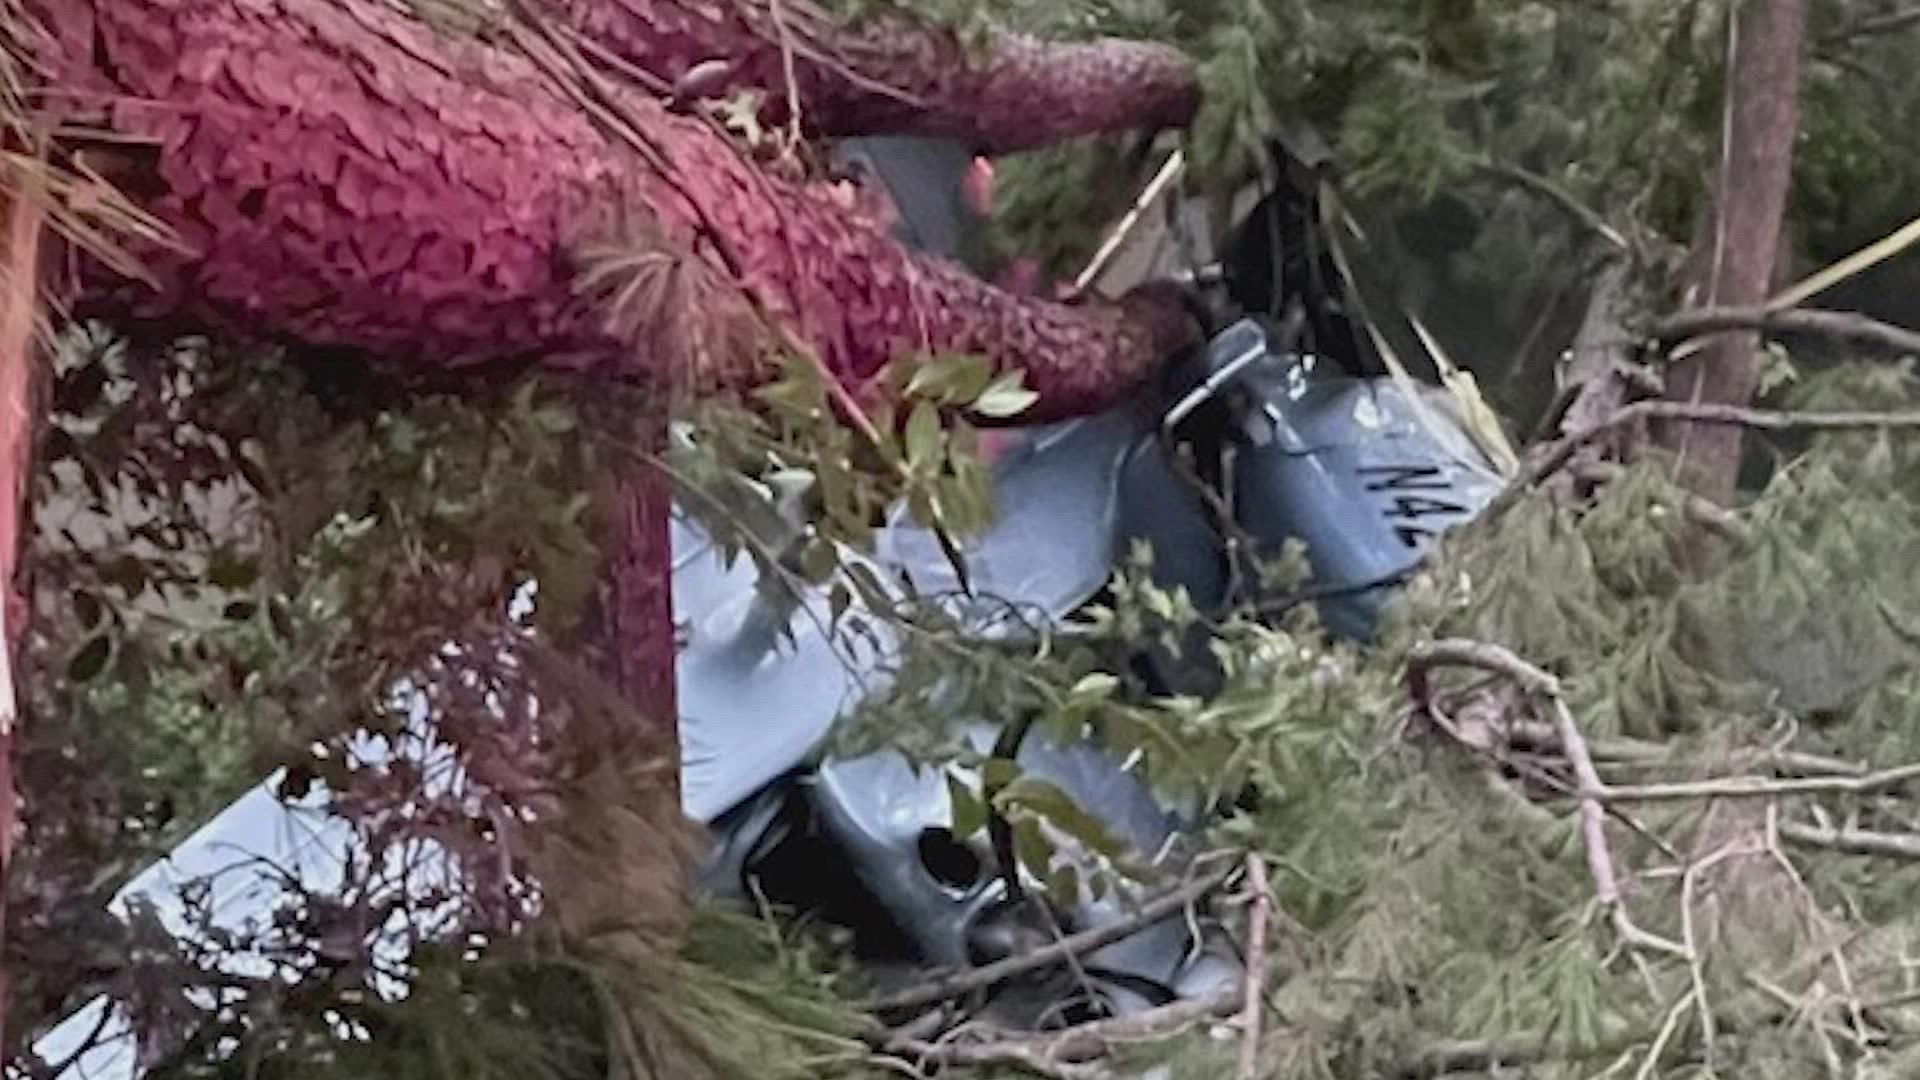 A small plane that lost power Thursday crashed near Hooks Aiport, leaving one person dead, according to the Texas Department of Public Safety.